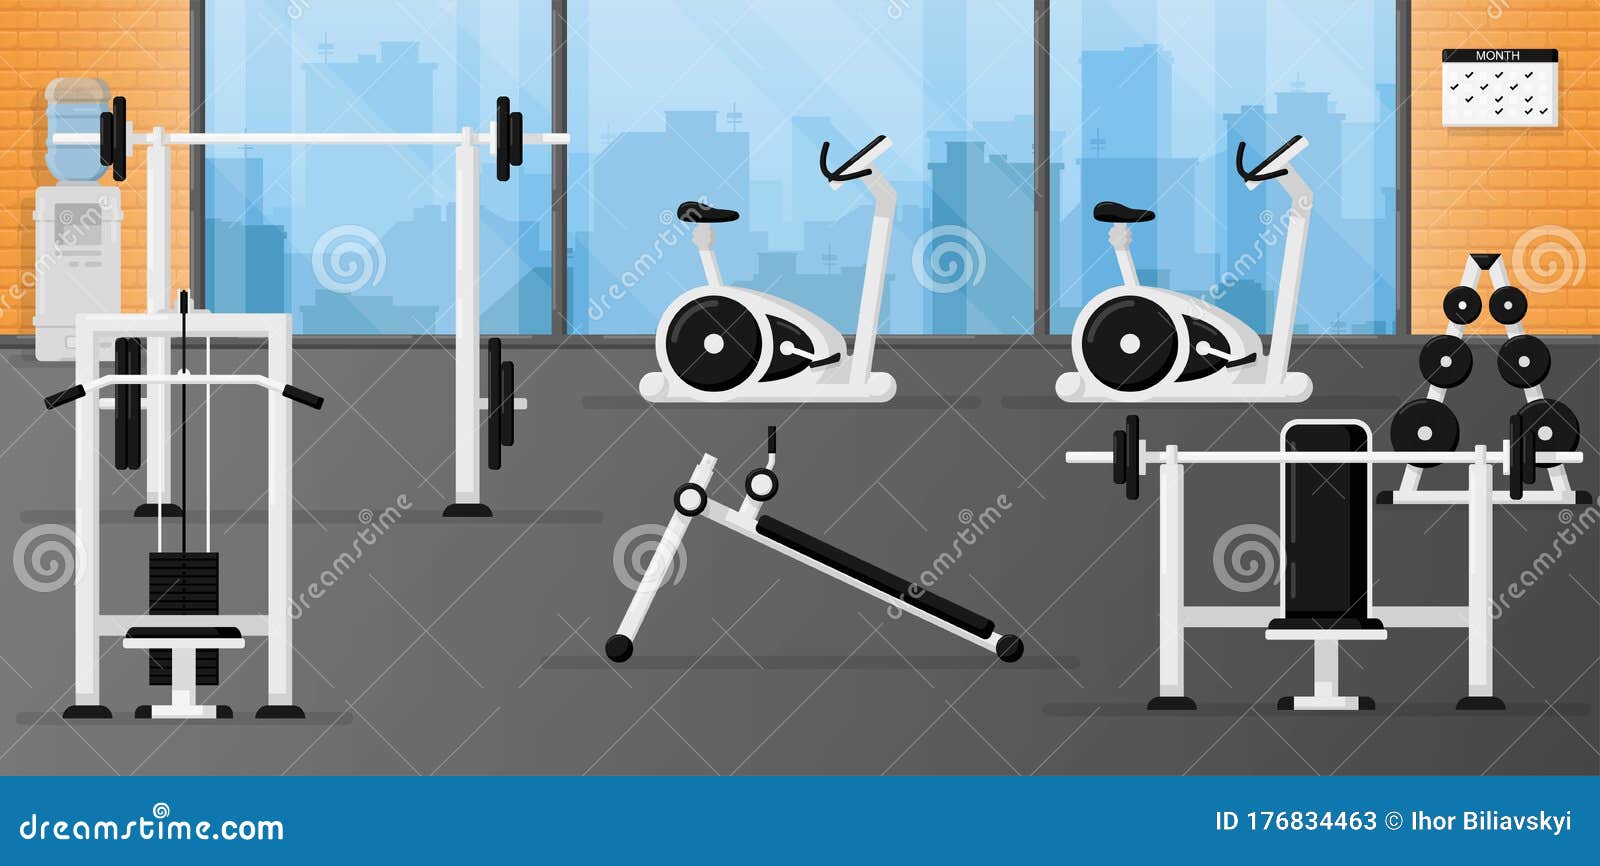 Gym Fitness Equipment Set in the Room with Beautiful Interior Design. Black  and White Color Stock Vector - Illustration of health, gymnastic: 176834463